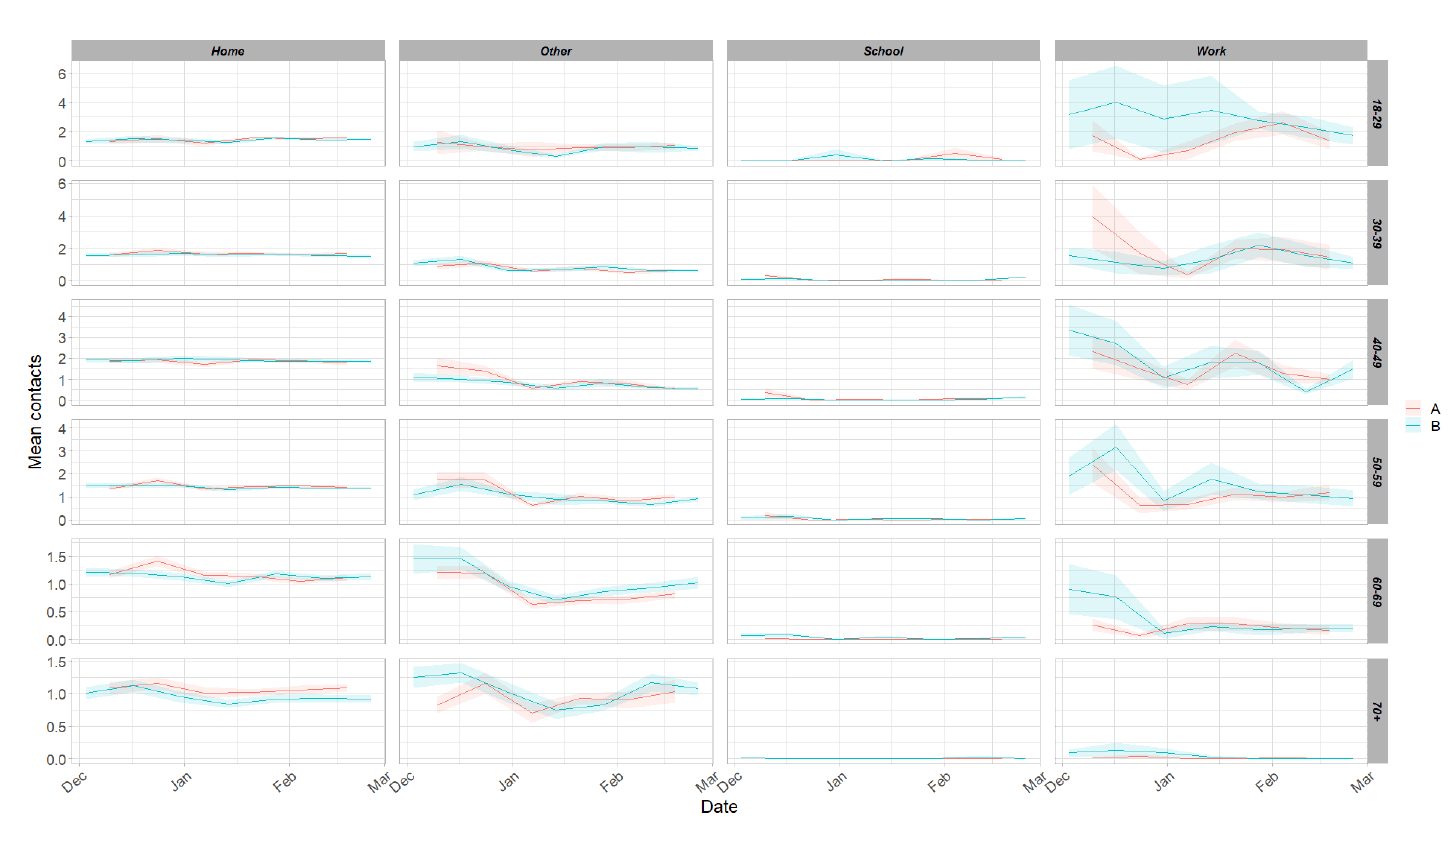 Figure 4. A series of line graphs showing mean adult contacts by setting and age group for panel A and panel B from 6 Aug to 3 Mar.